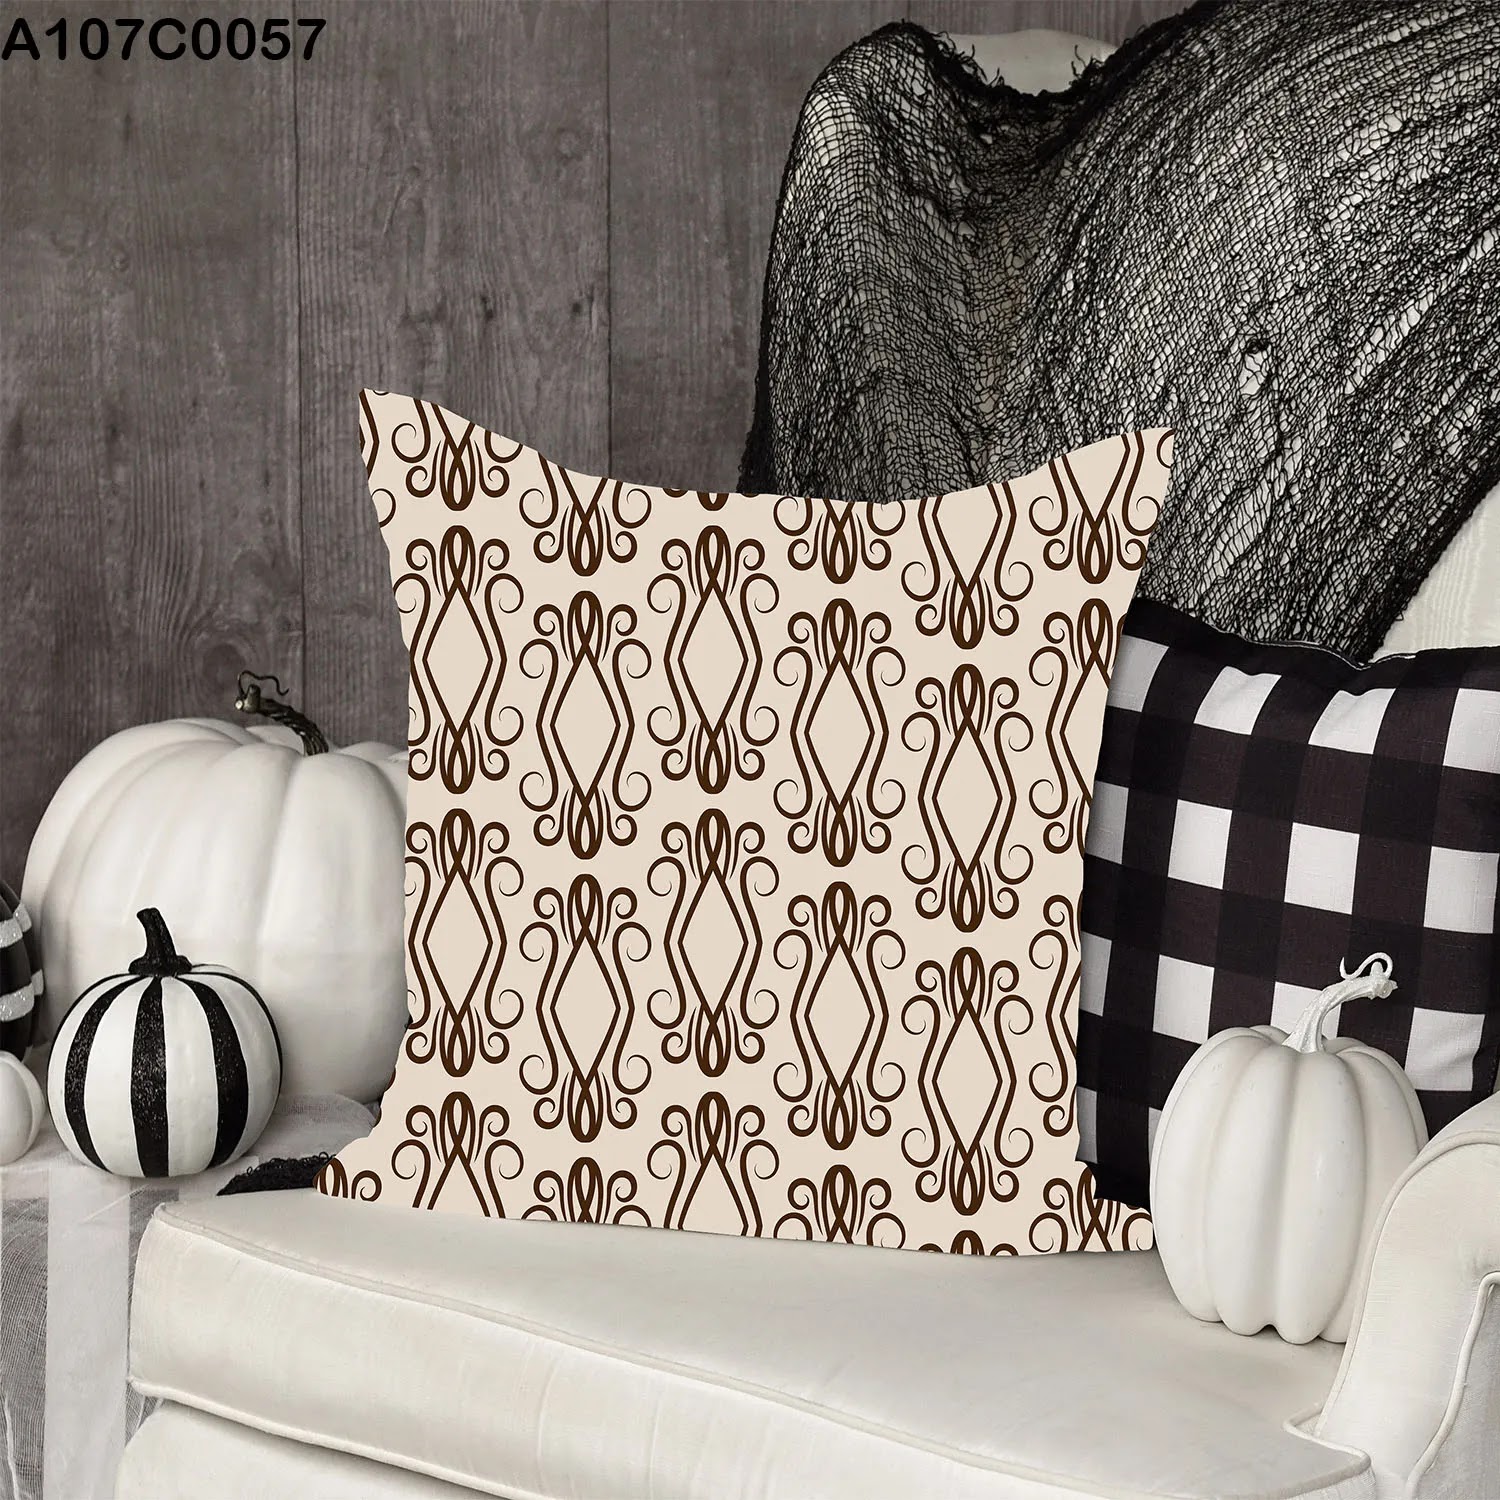 Brown pillow case with beige drawings